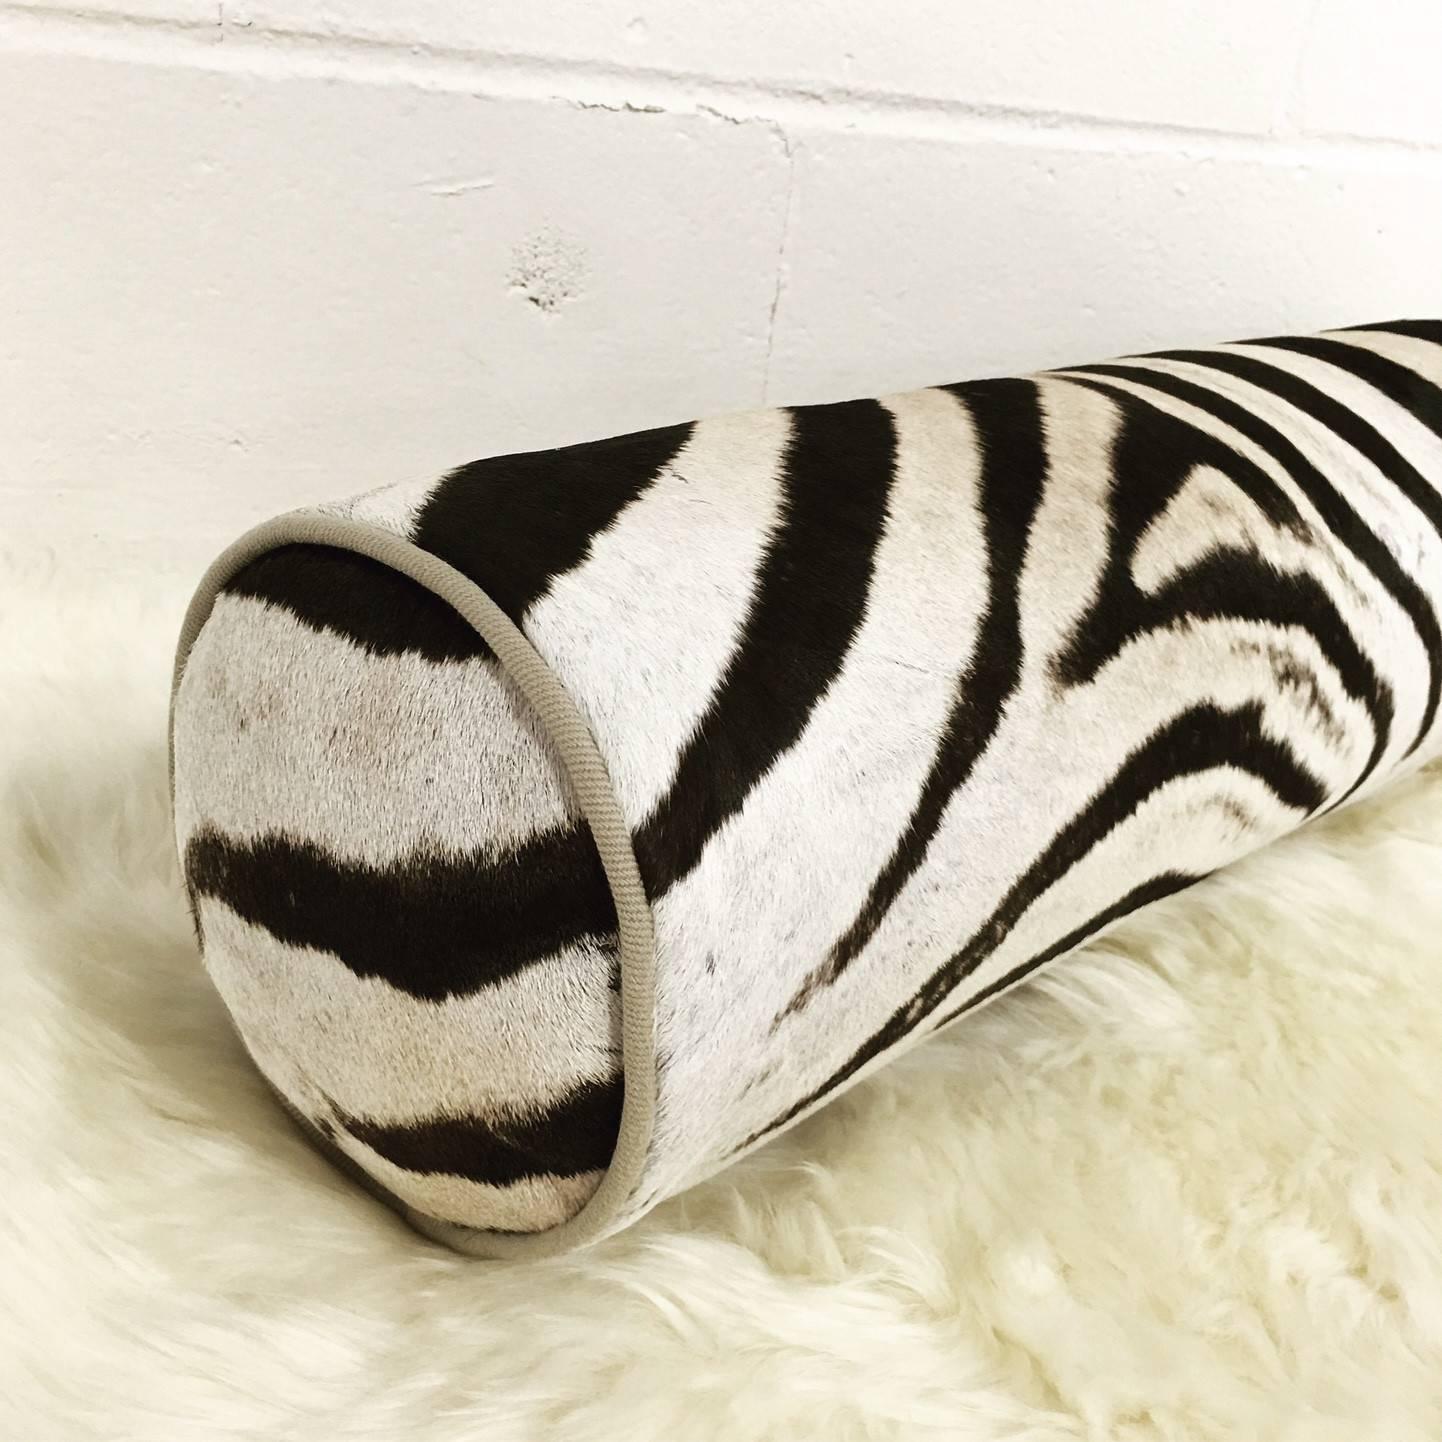 Forsyth zebra hide pillows are simply the best. The most beautiful hides are selected, hand-cut, hand-stitched, and hand stuffed with the finest goose down. Each step is meticulously curated by Saint Louis based Forsyth artisans. Every pillow is a